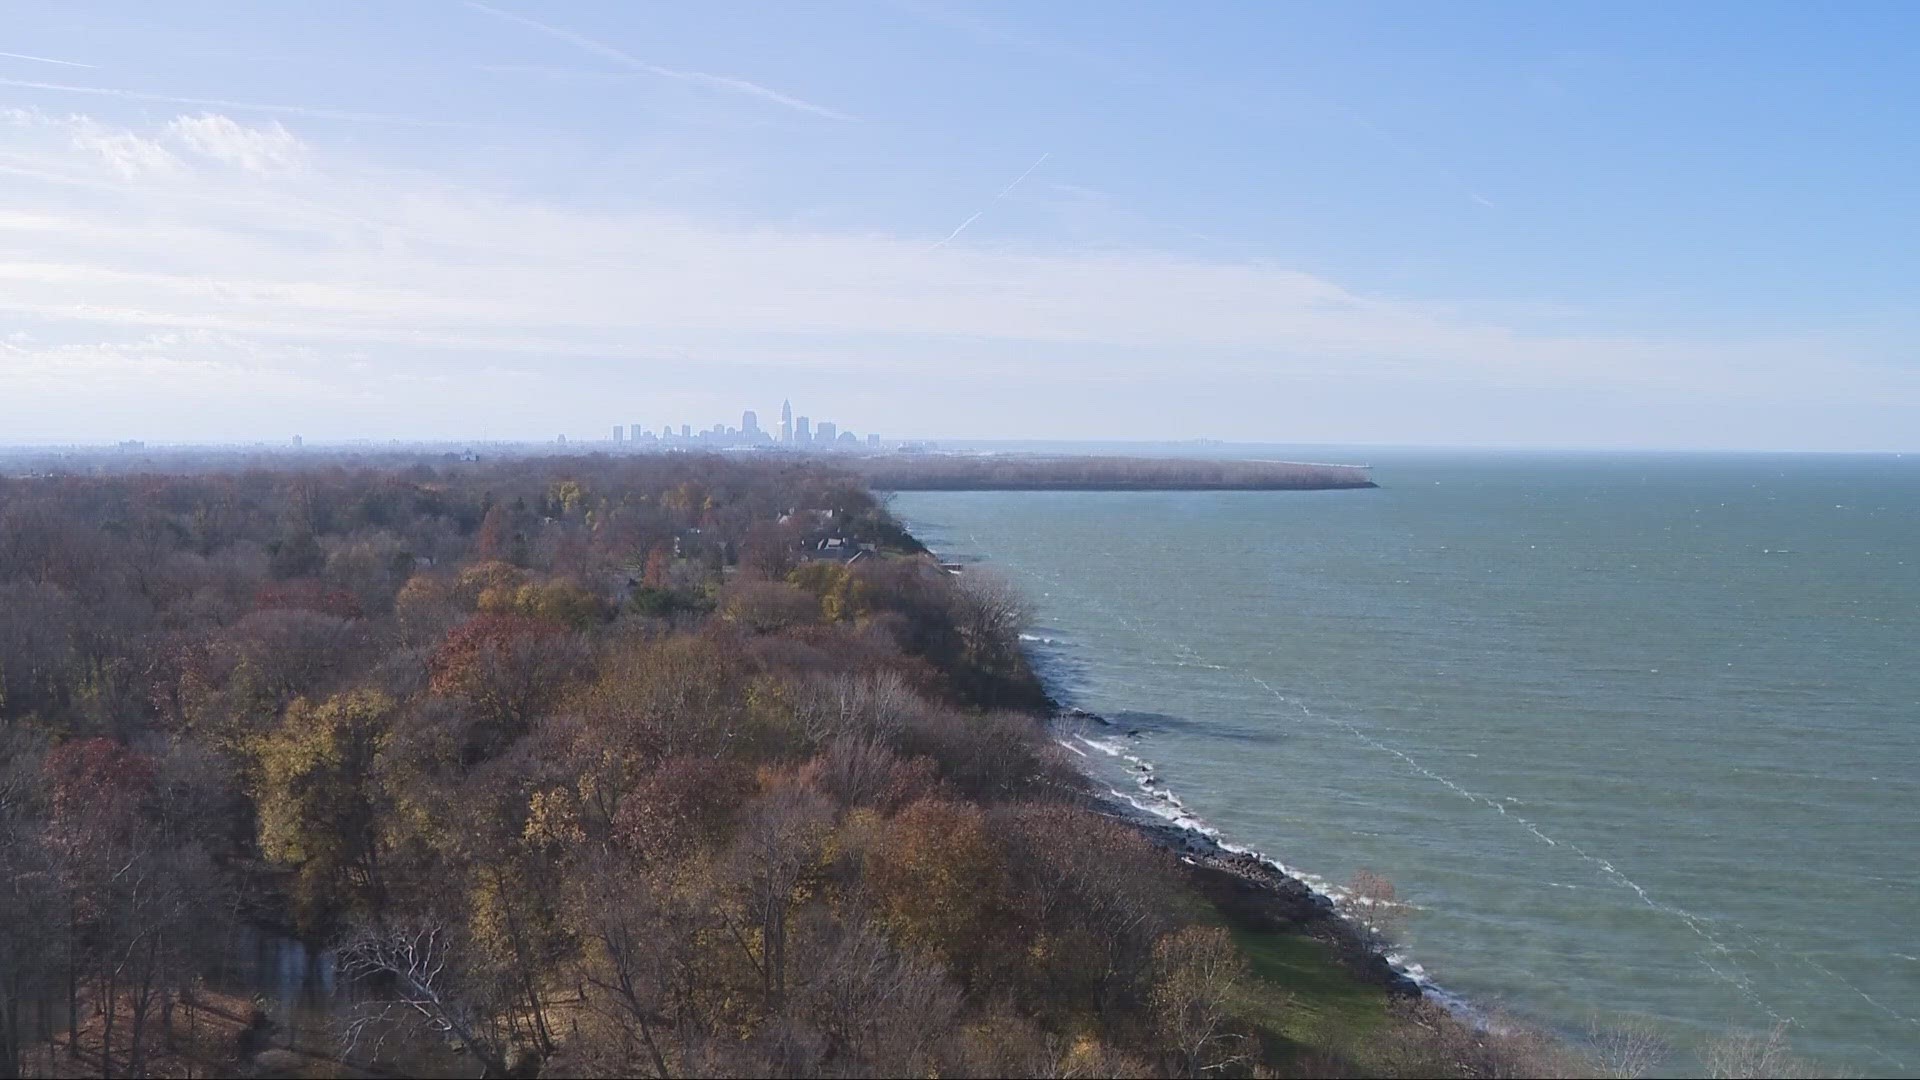 For too long, Lake Erie's shoreline has been ignored and unused across Northeast Ohio, but new developments aimed at increasing access are making an impact.